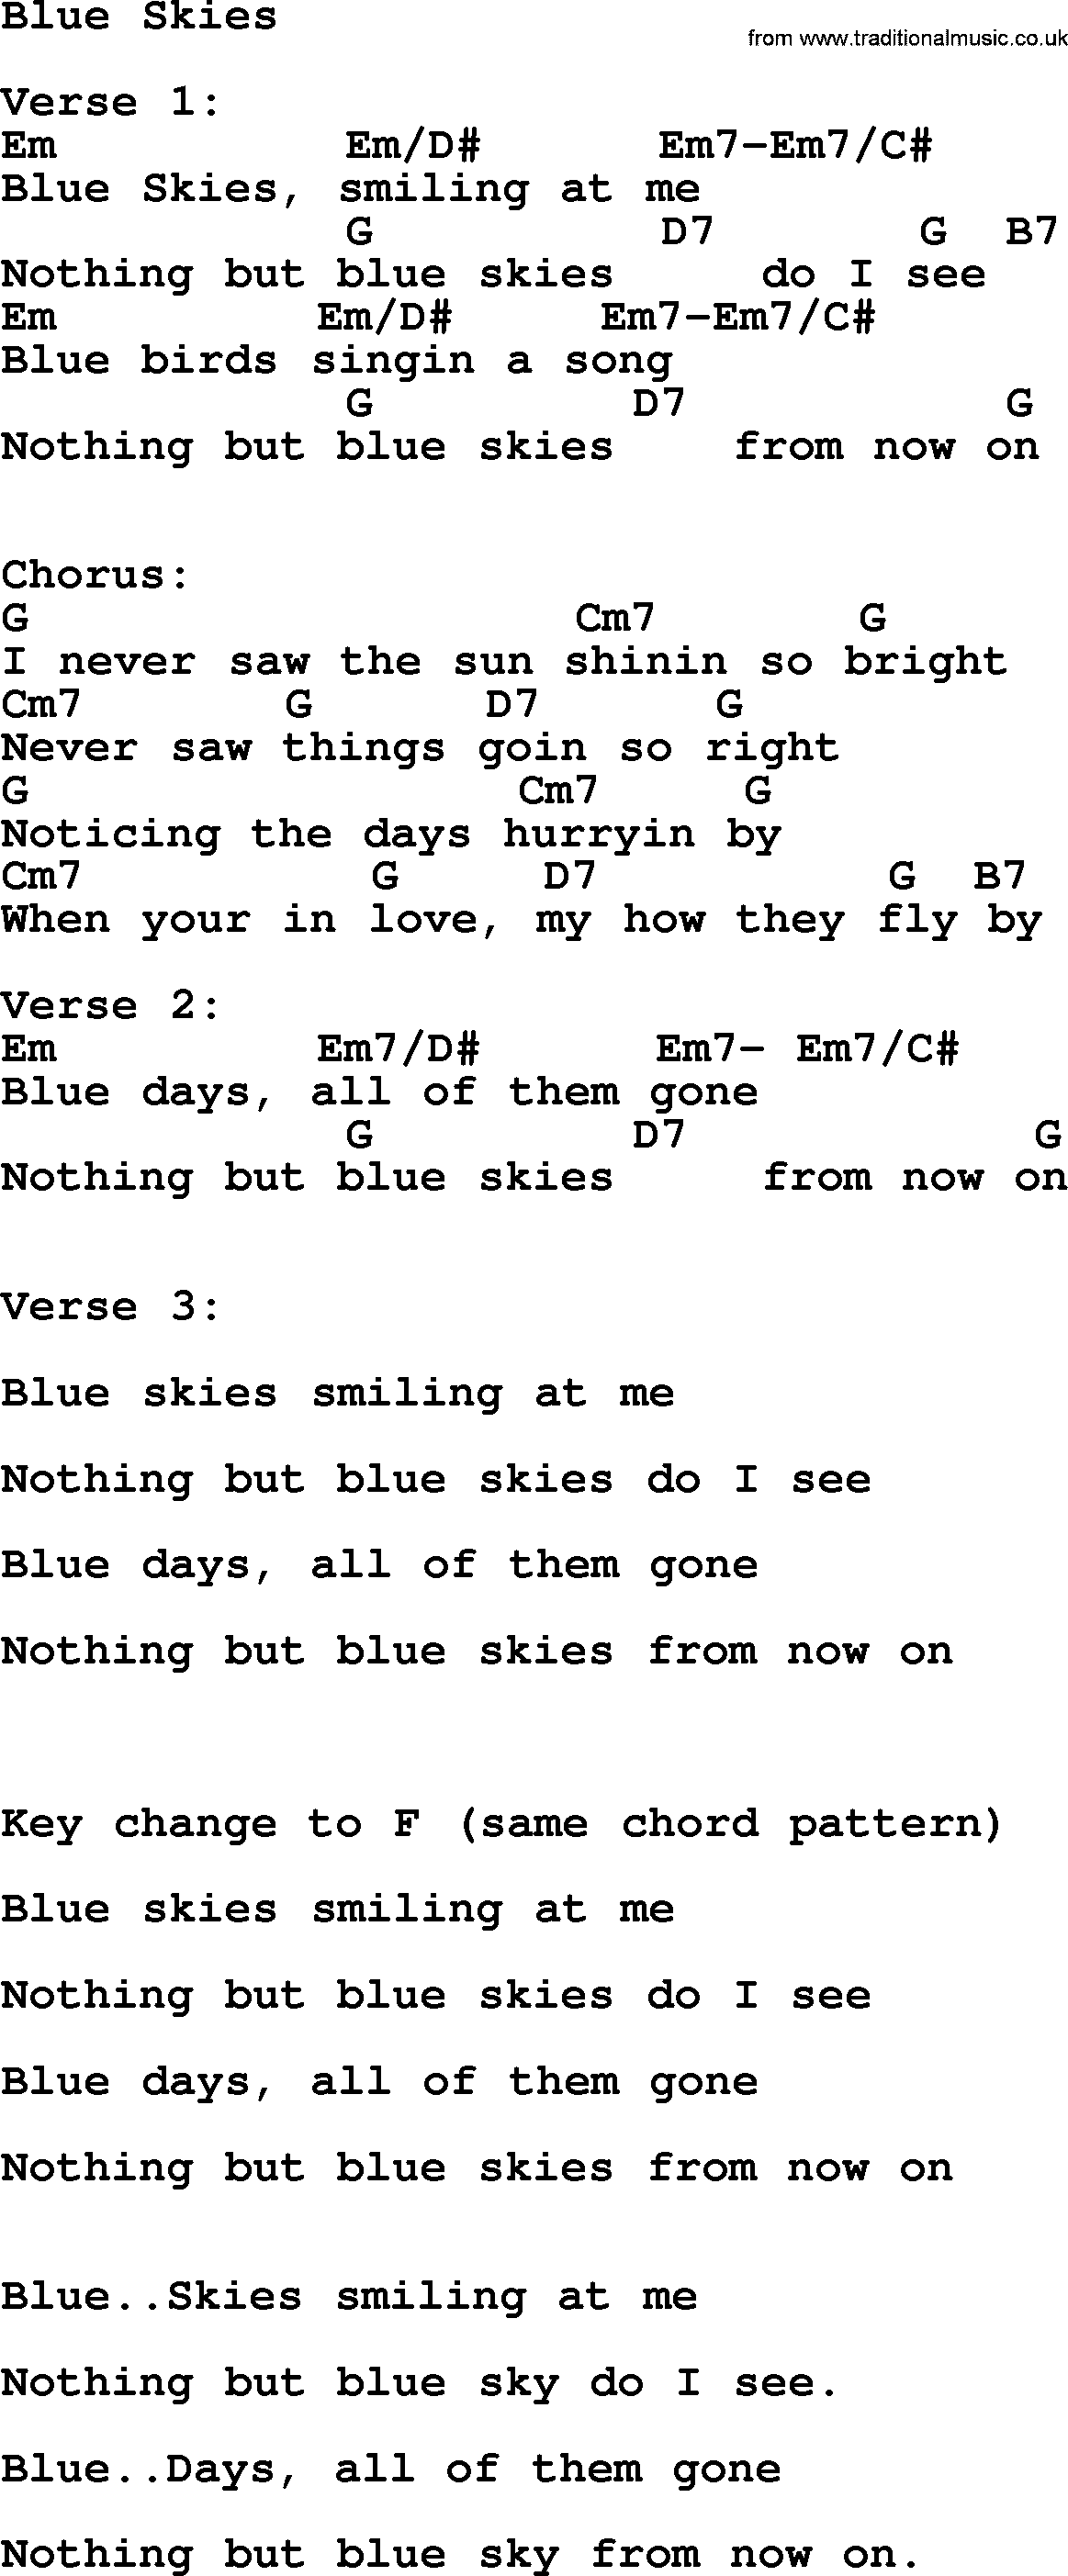 Willie Nelson song: Blue Skies, lyrics and chords